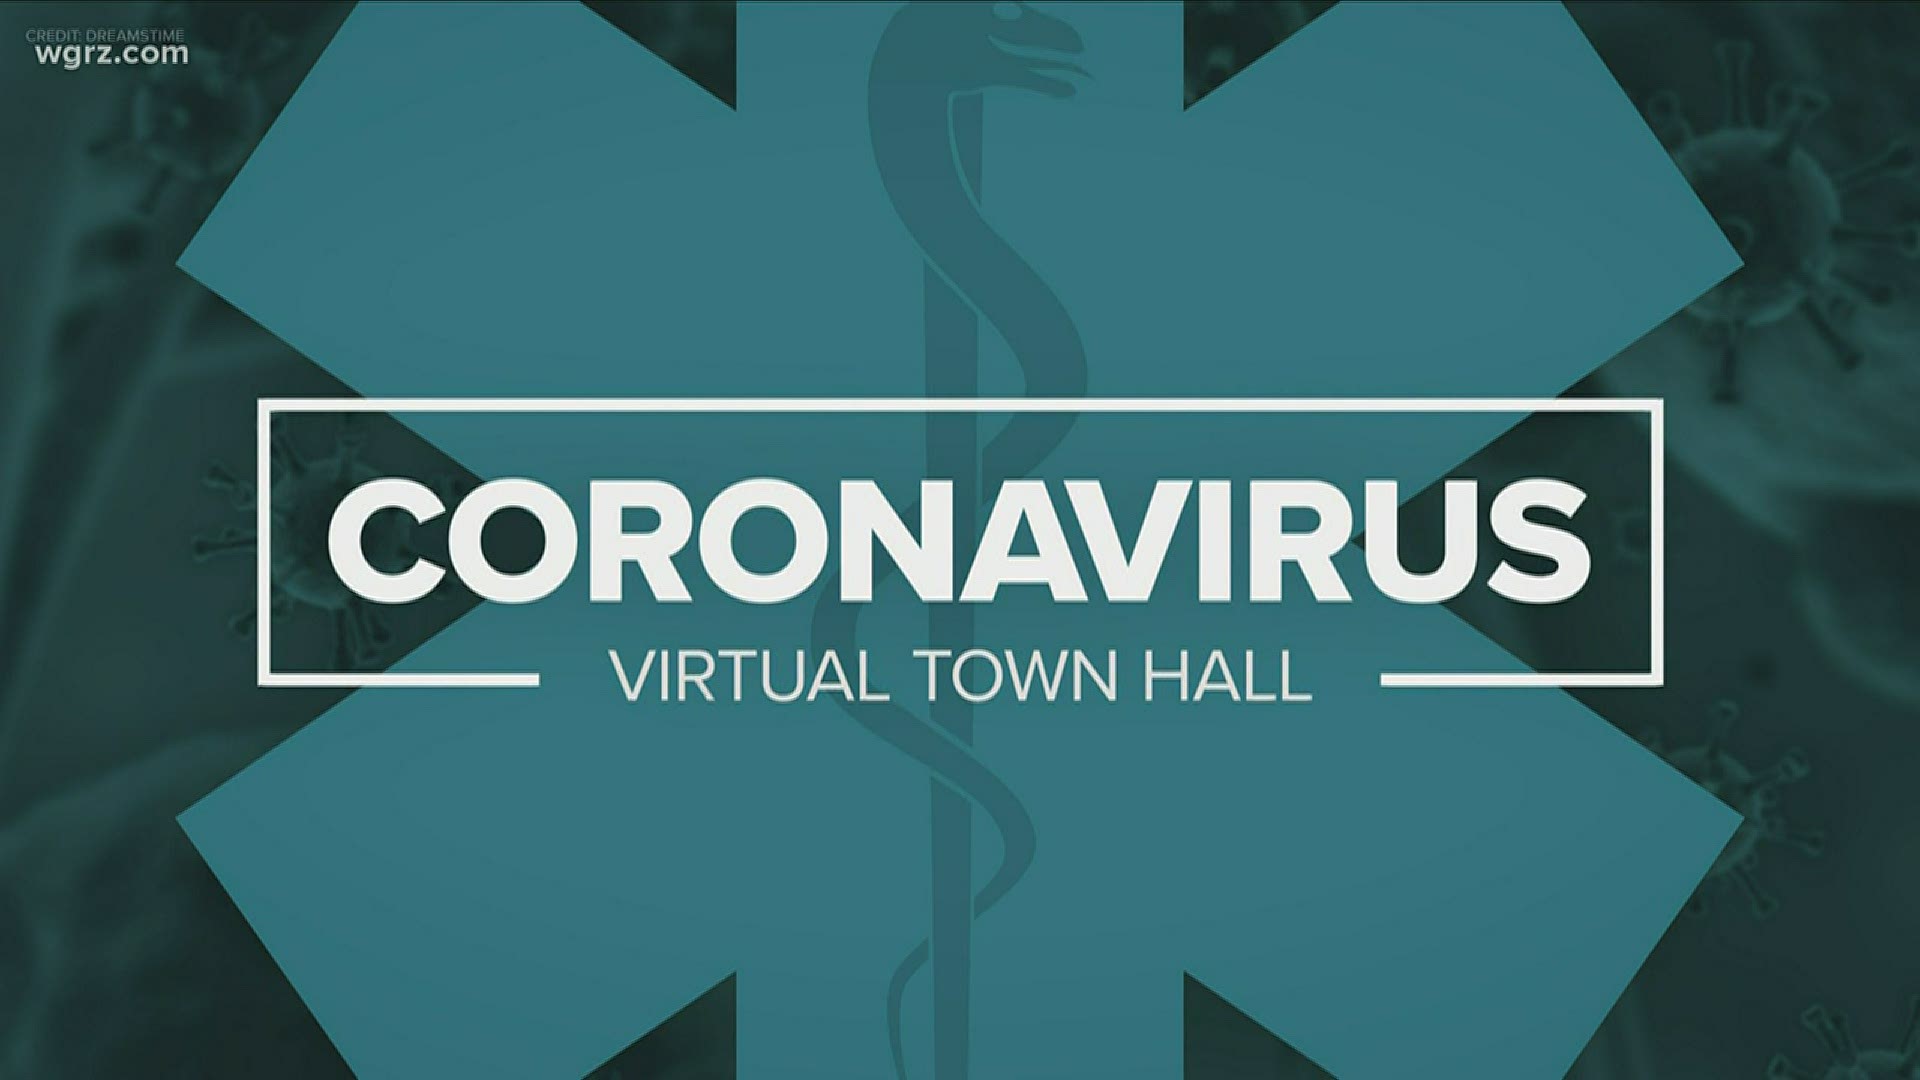 we get your coronavirus questions answered by experts